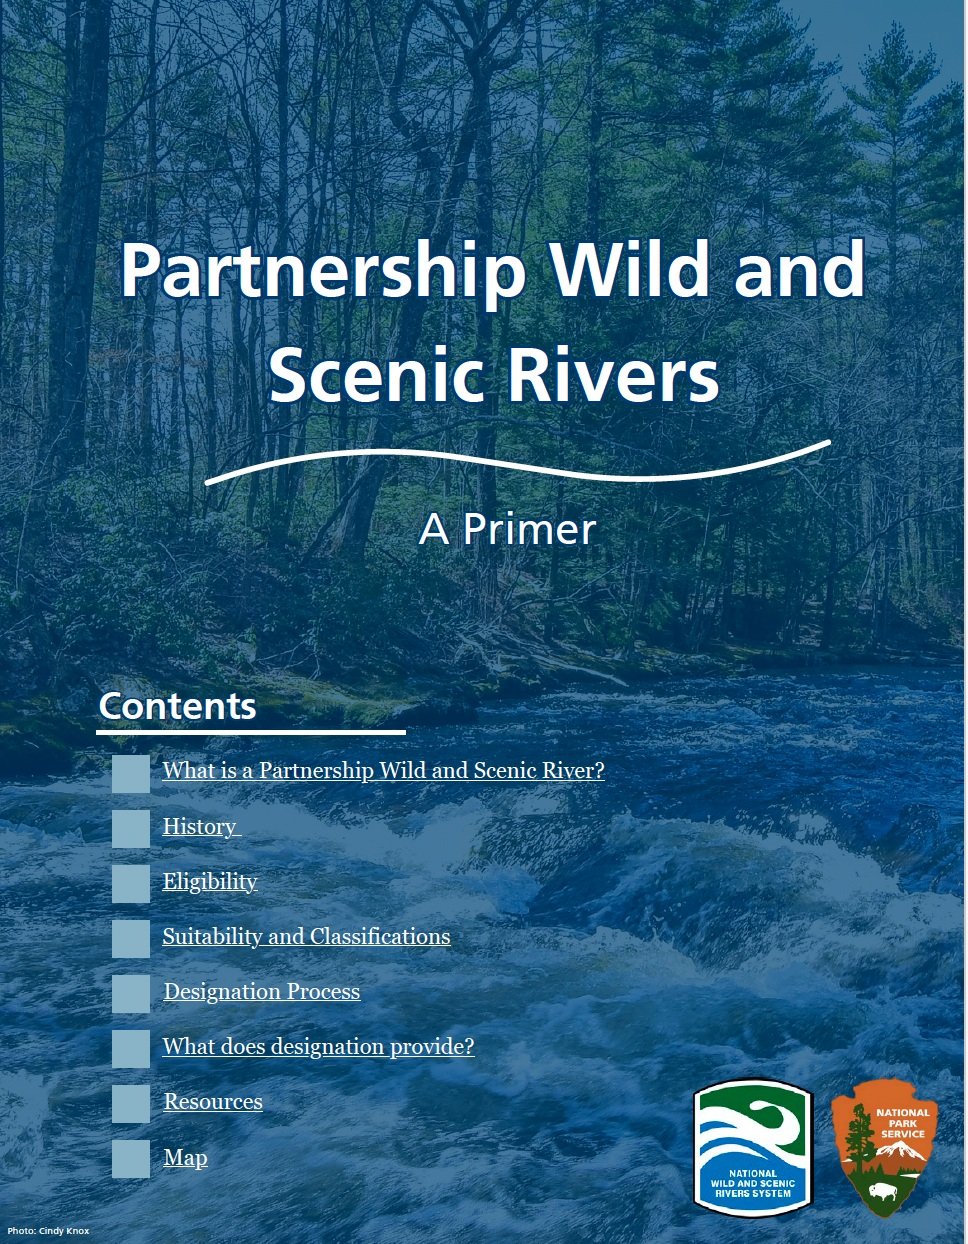 A Primer on Partnership Wild and Scenic Rivers